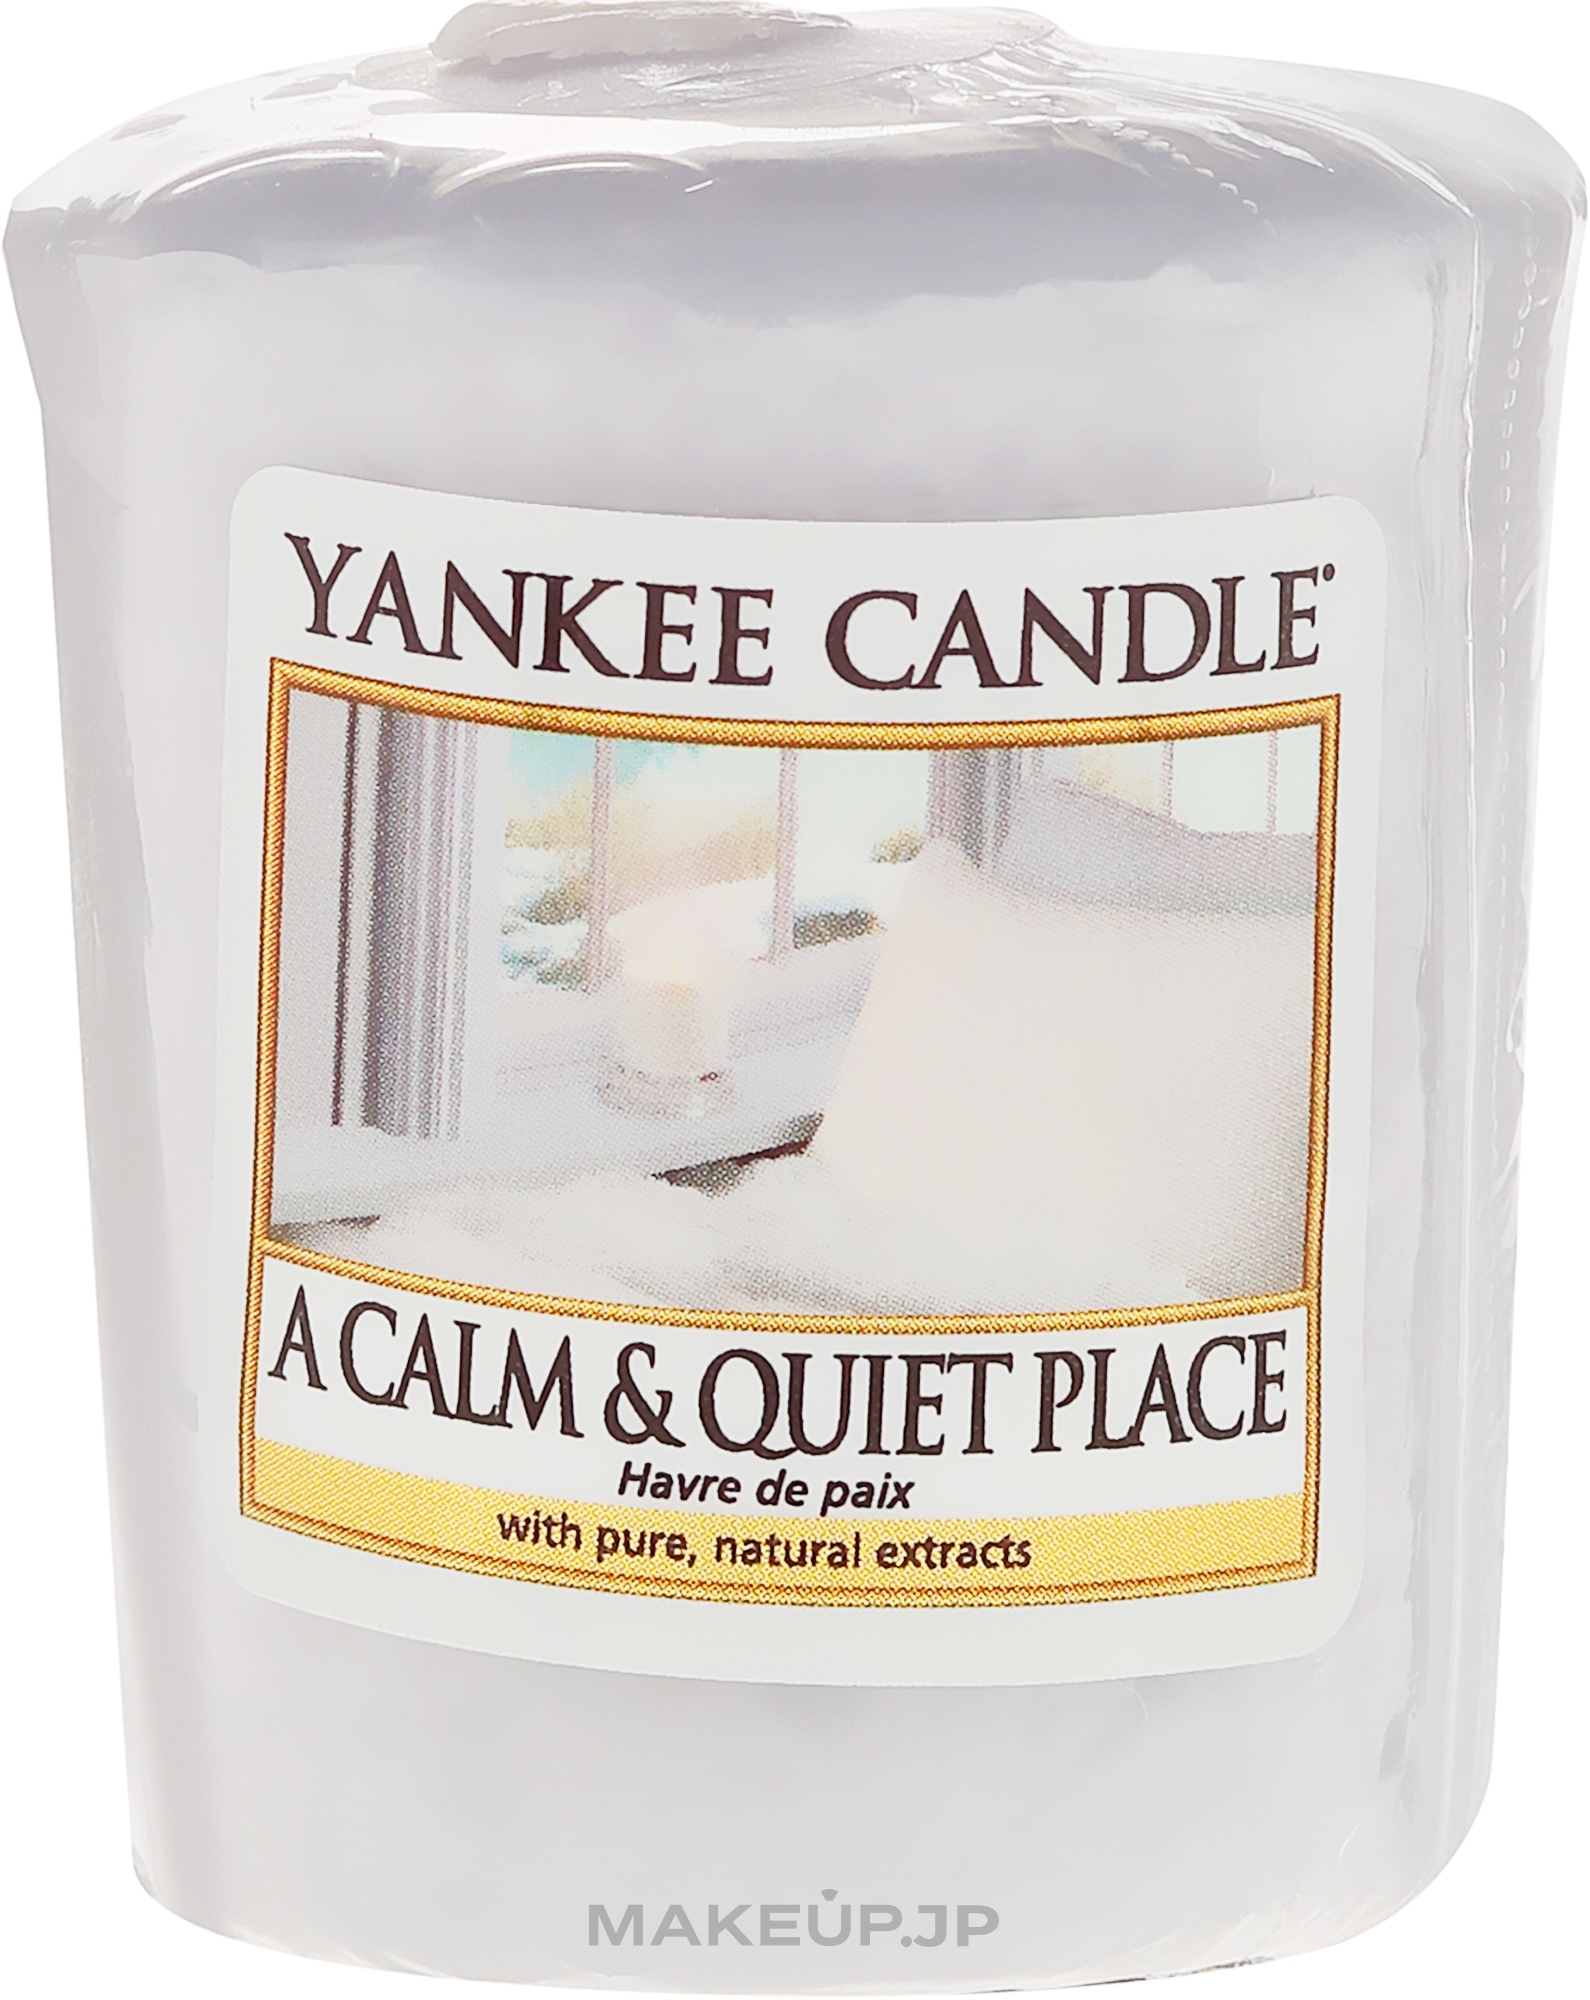 Scented Candle - Yankee Candle A Calm & Quiet Place Sampler Votive — photo 49 g